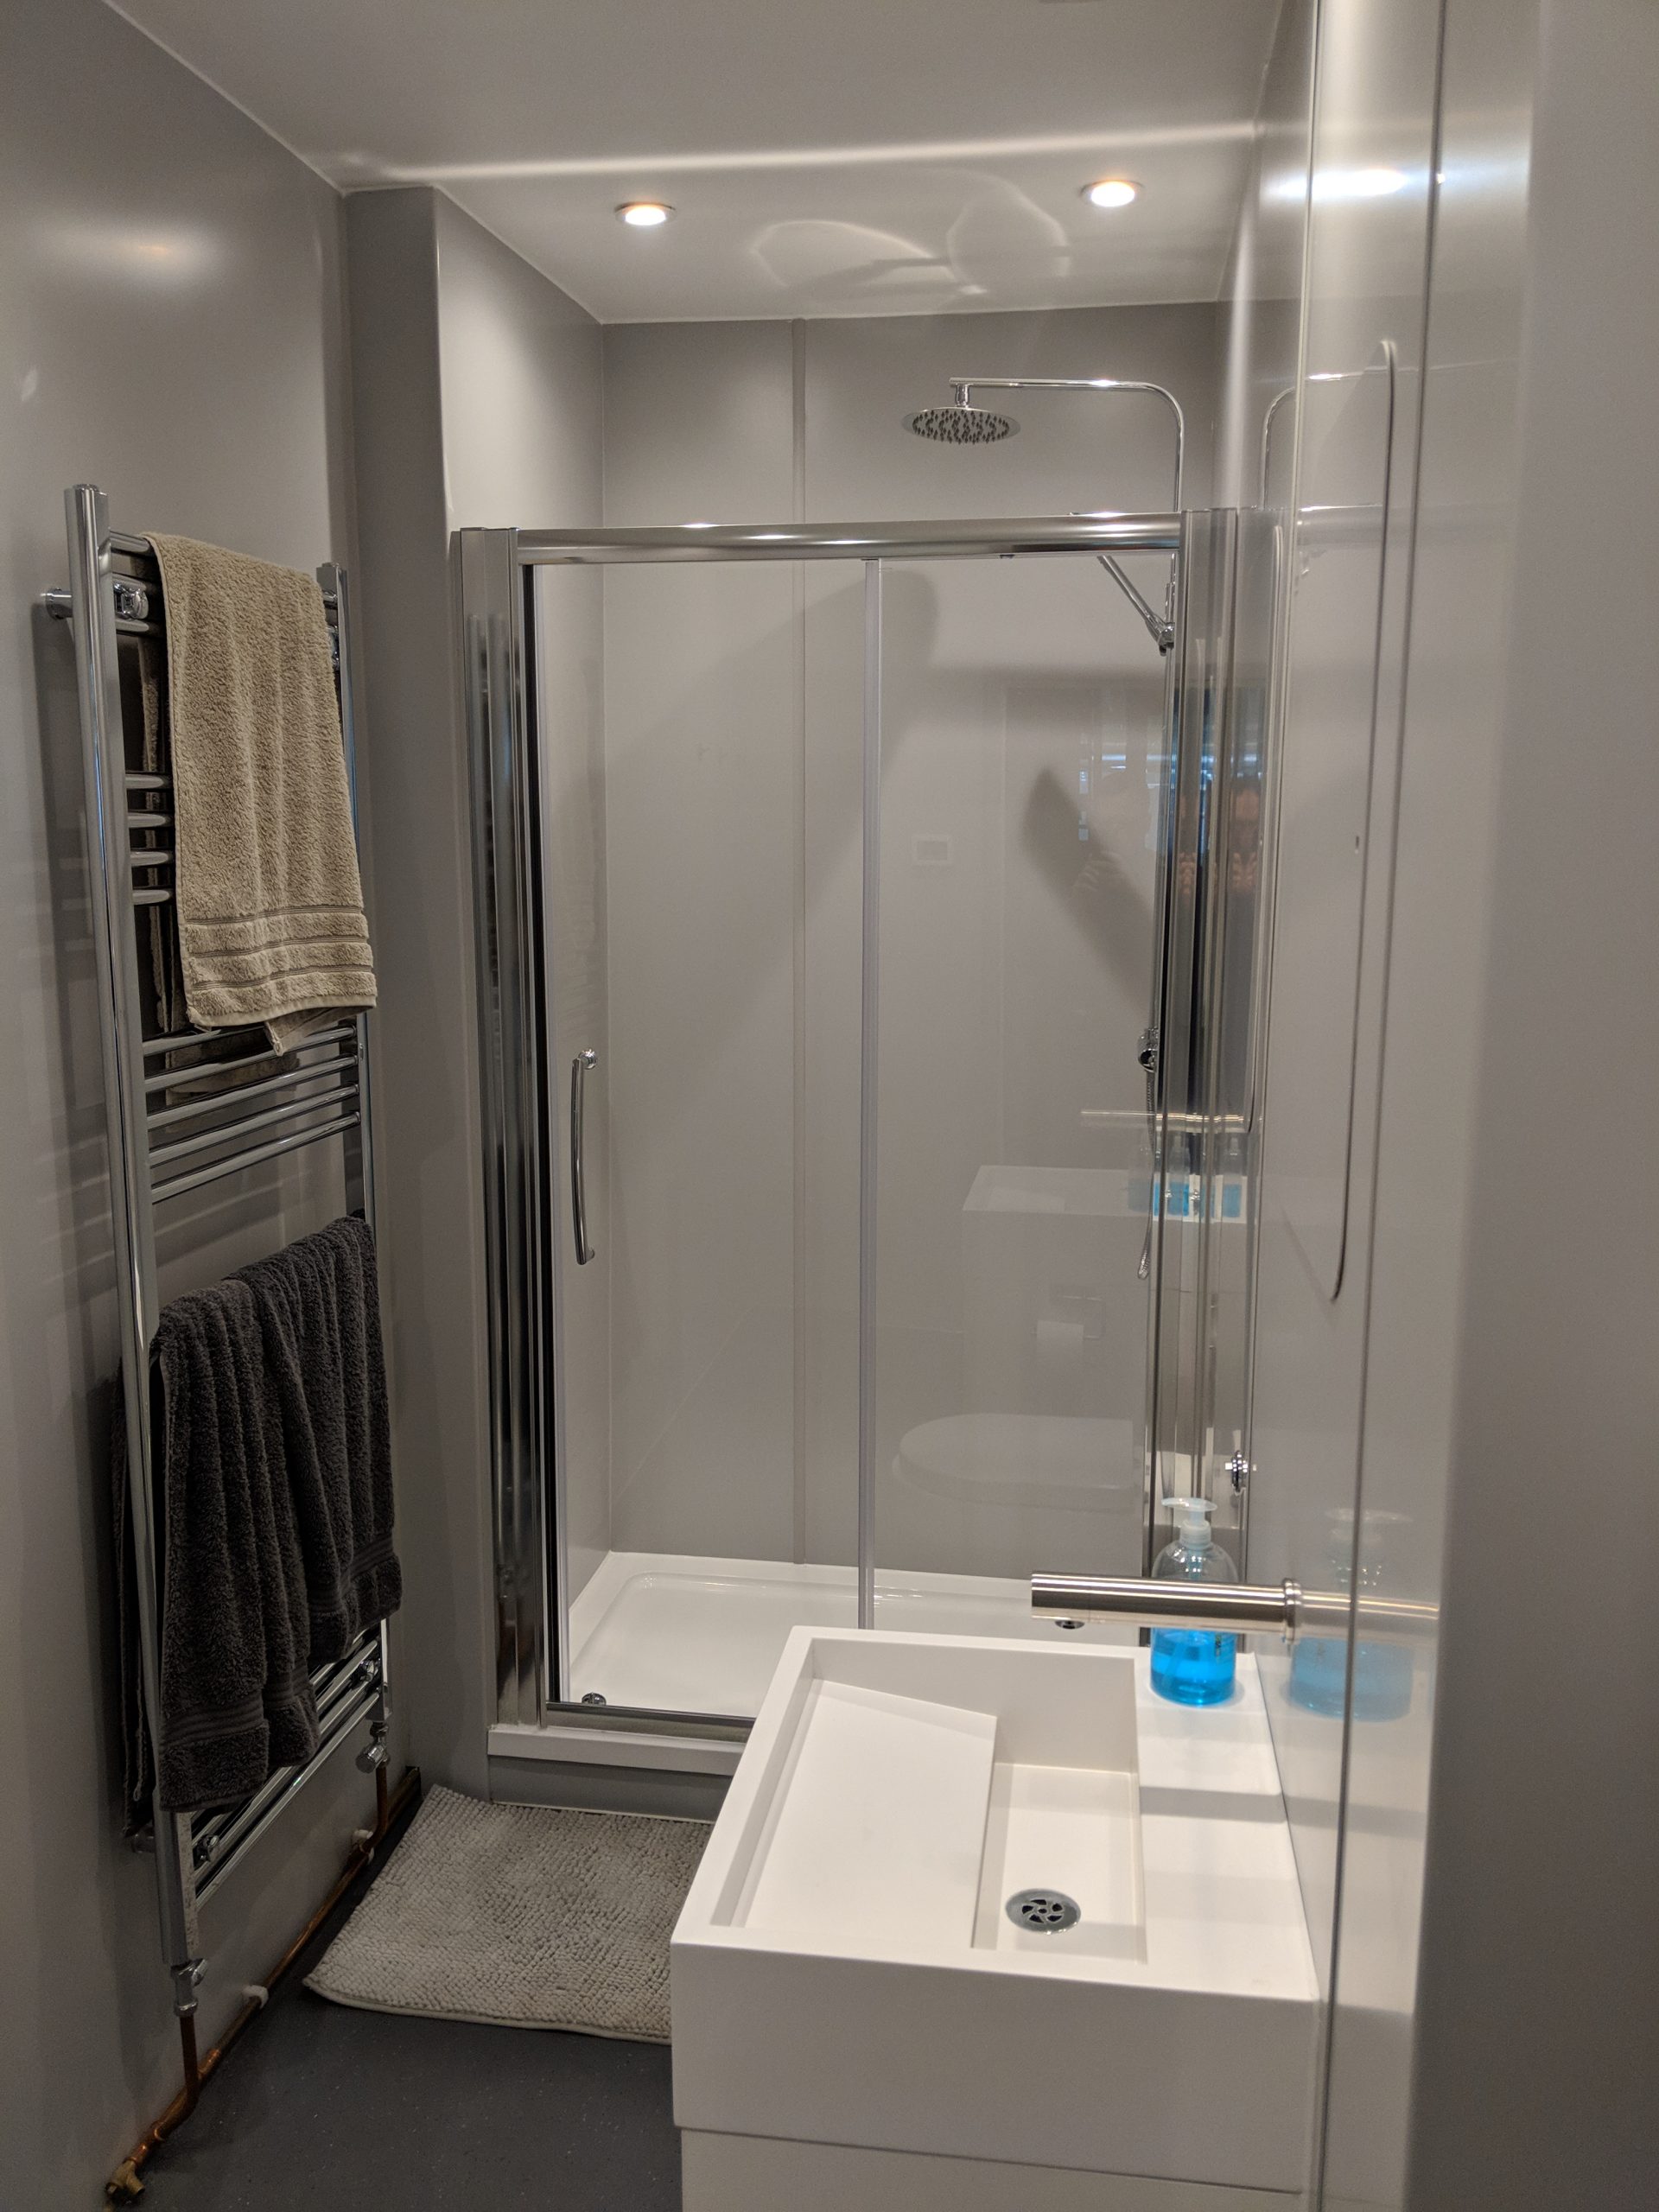 Complete shower rooms can be installed using the grants. These can be private rooms with shower, towel racks and sink and mirror.